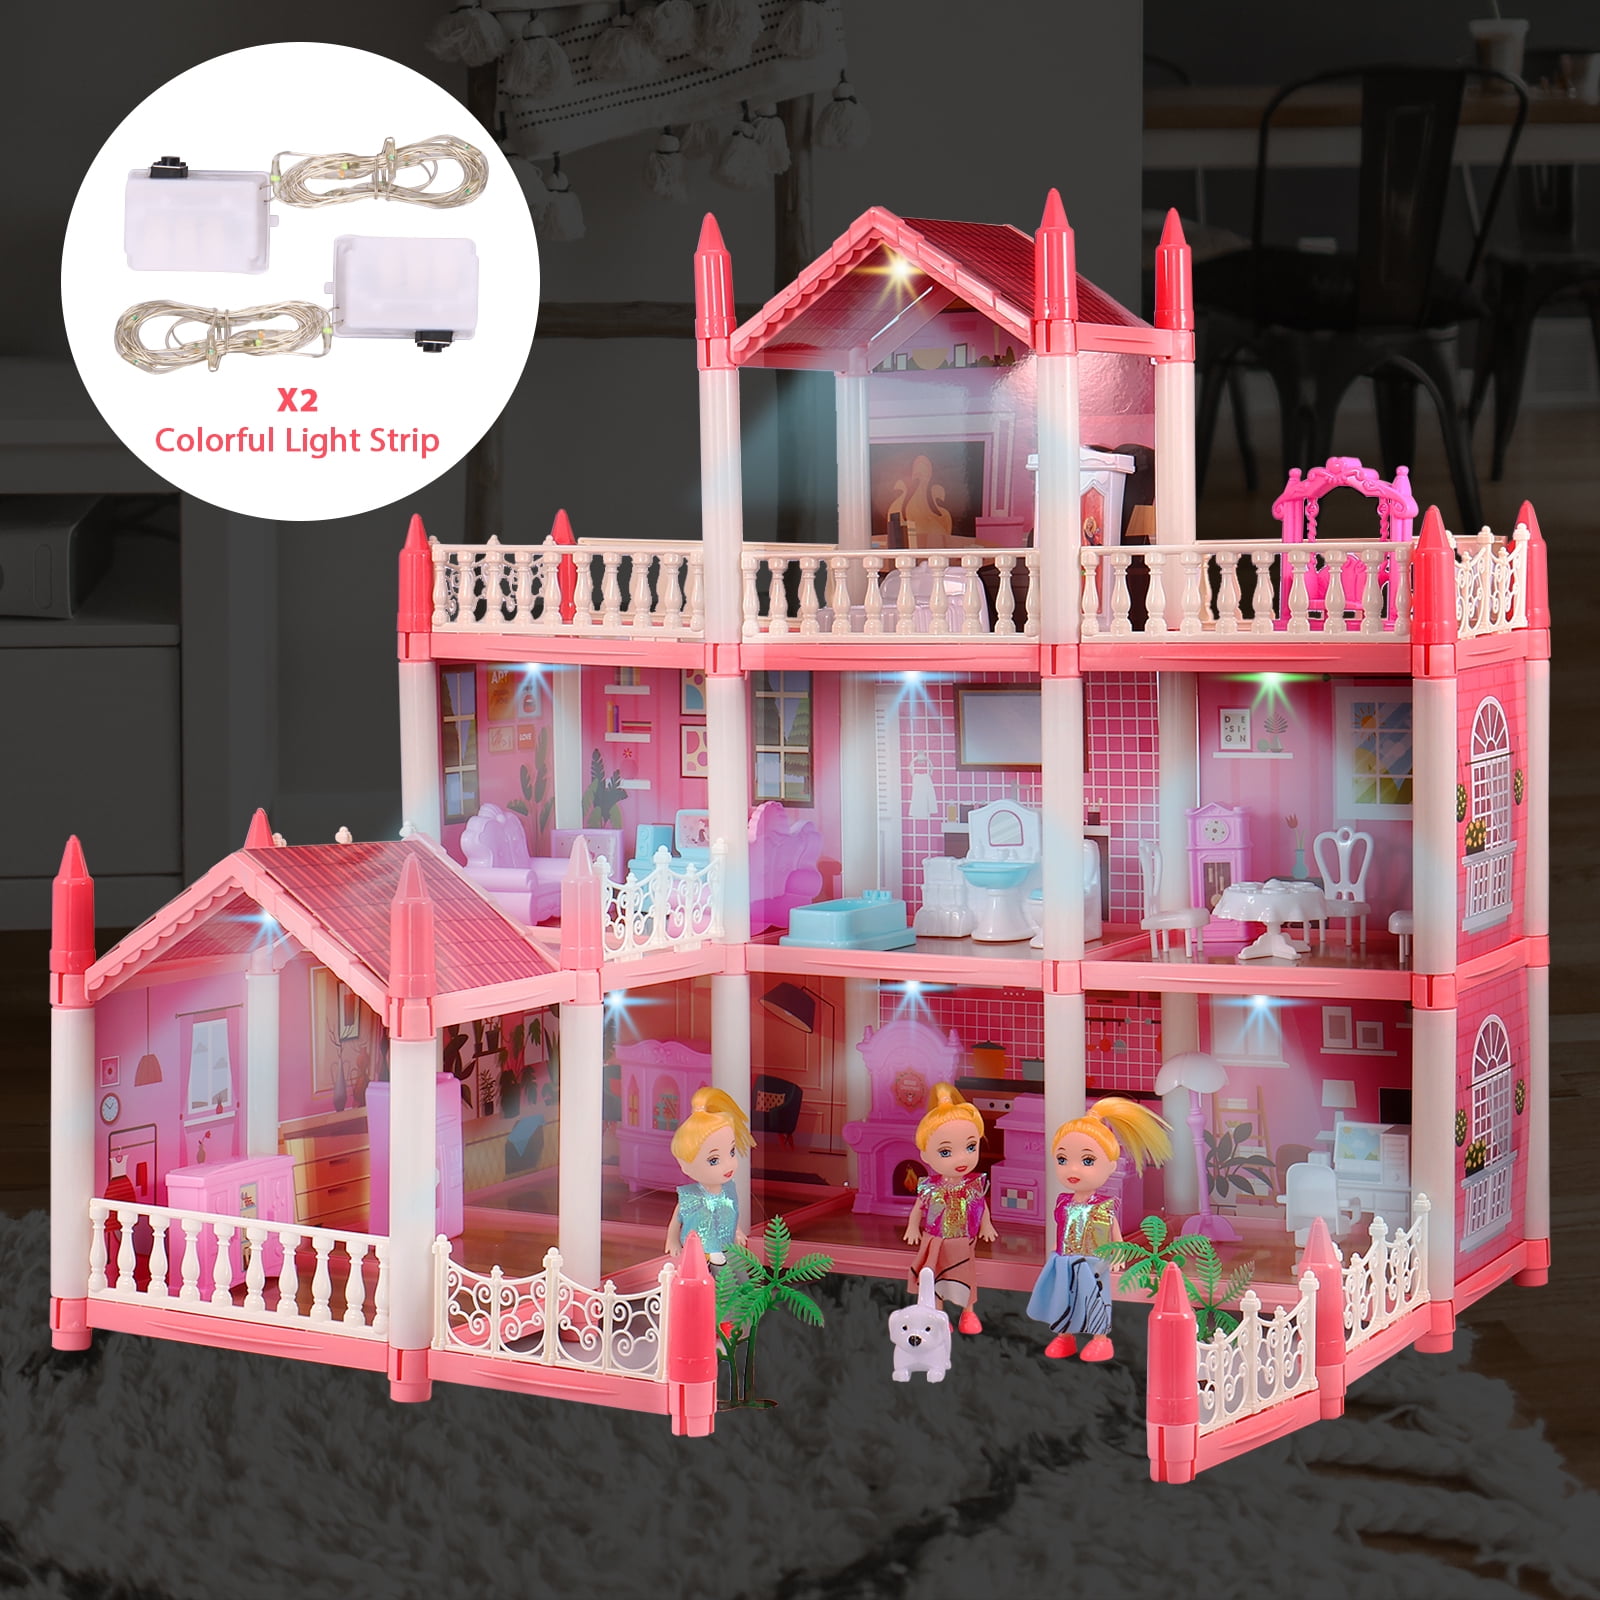 These New Dollhouses Are Taking TikTok by Storm - PureWow